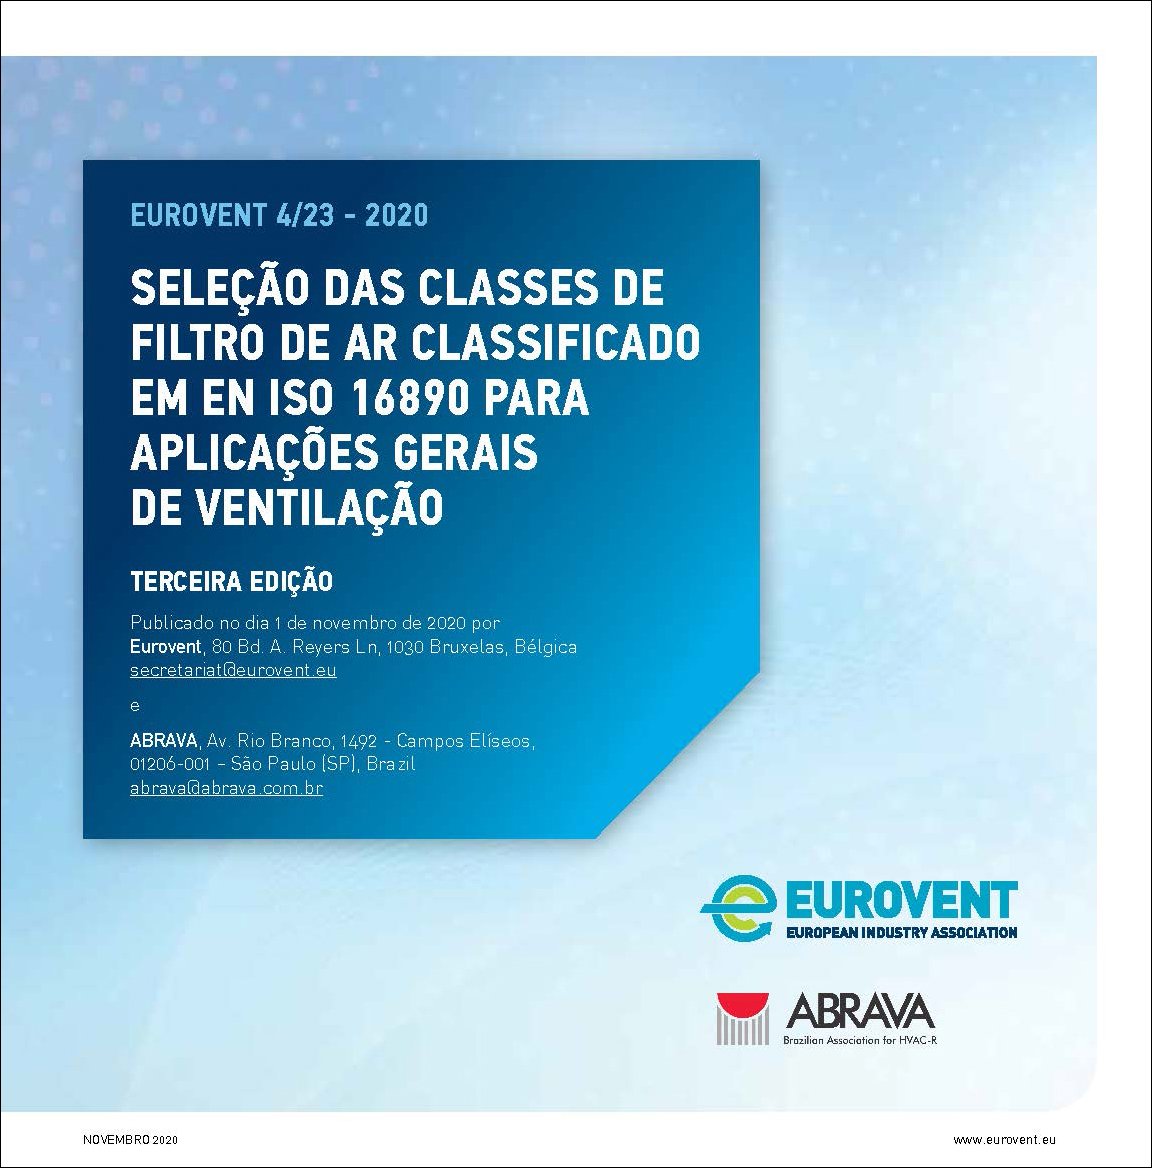 Eurovent REC 4-23 - Selection of EN ISO 16890 rated air filter classes - Third Edition - 2020 - PT - Web_0_0.jpg